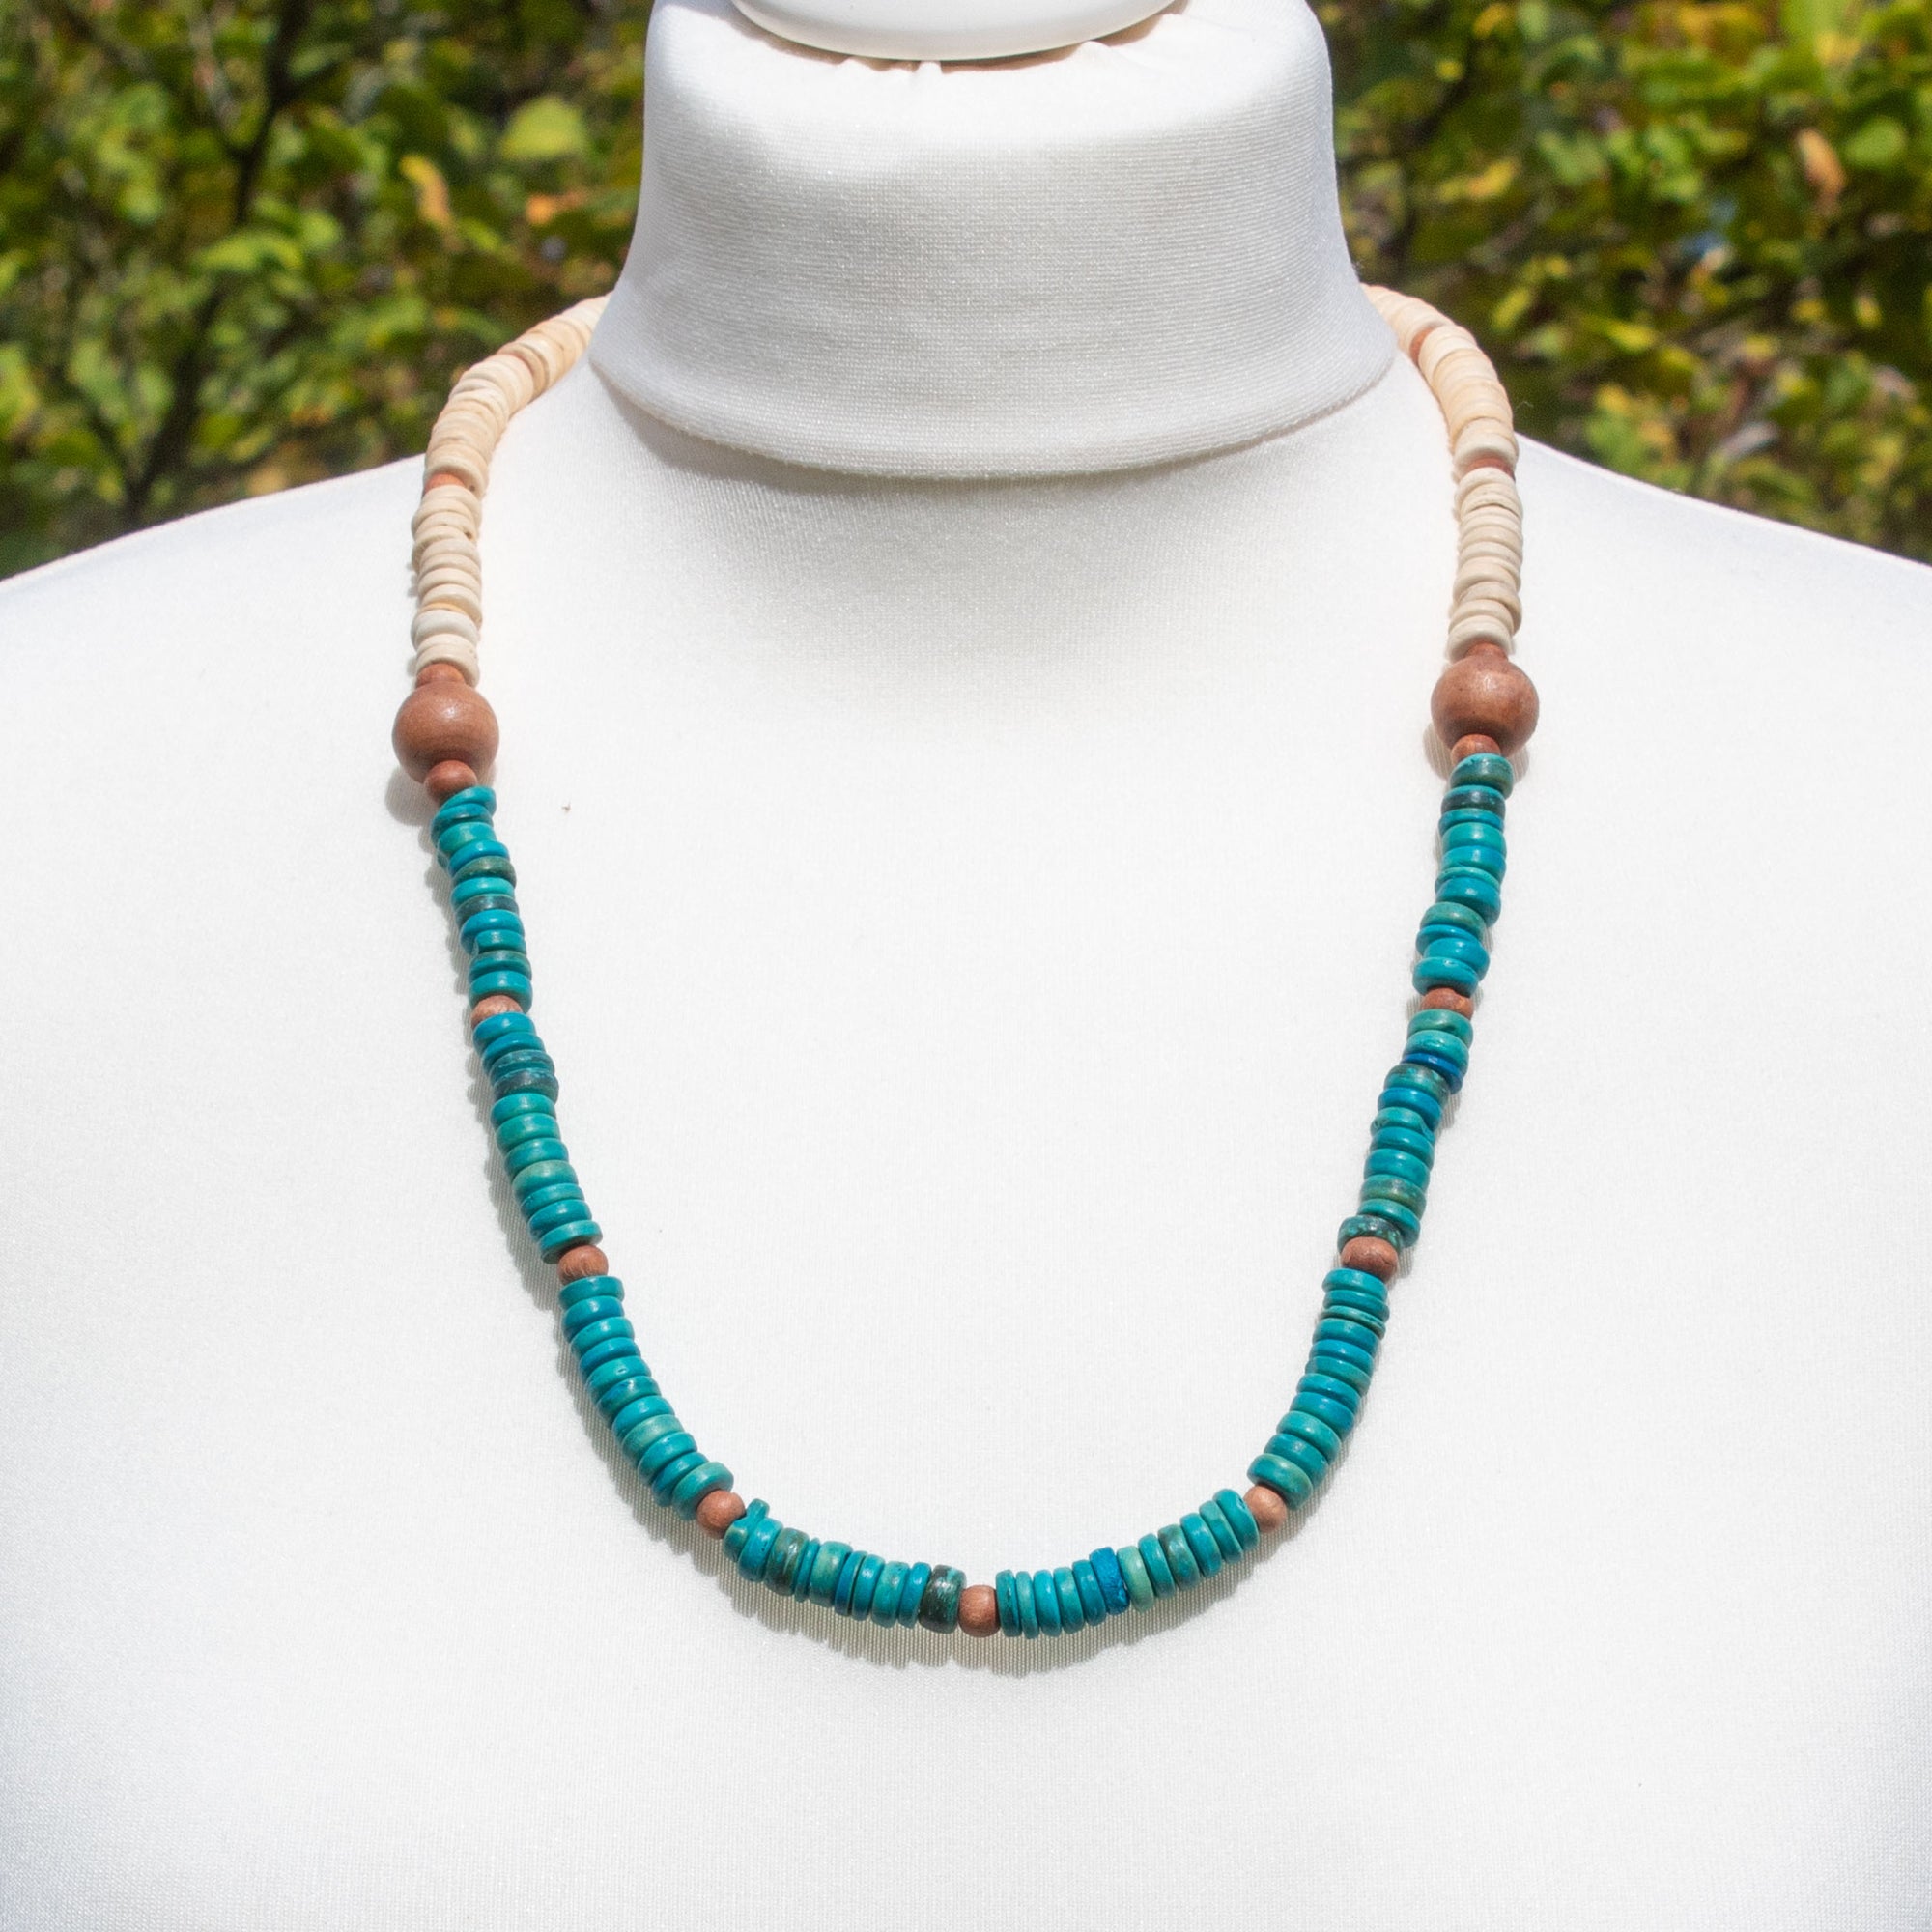 Cream & Turquoise Wooden Bead Necklace | Necklace - The Naughty Shrew